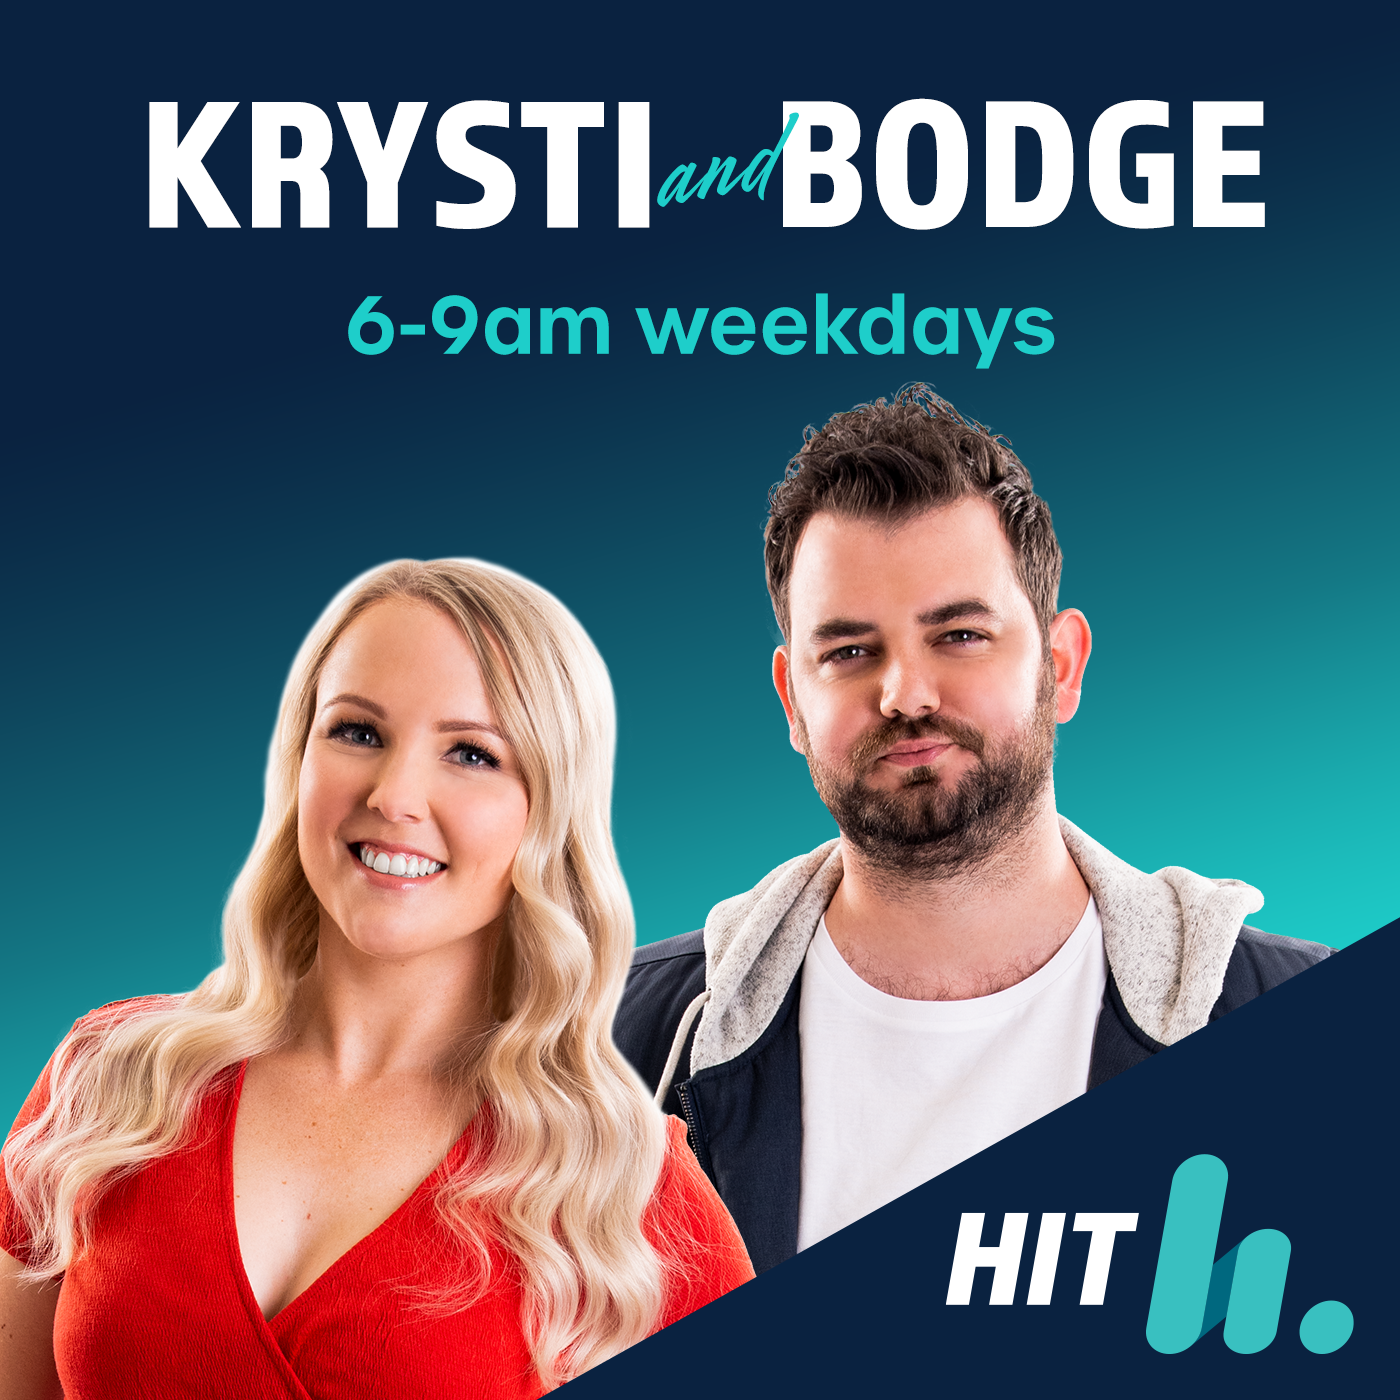 Krysti & Bodge - Cheating In Fake News, More UFC Members, What Do You Hear?